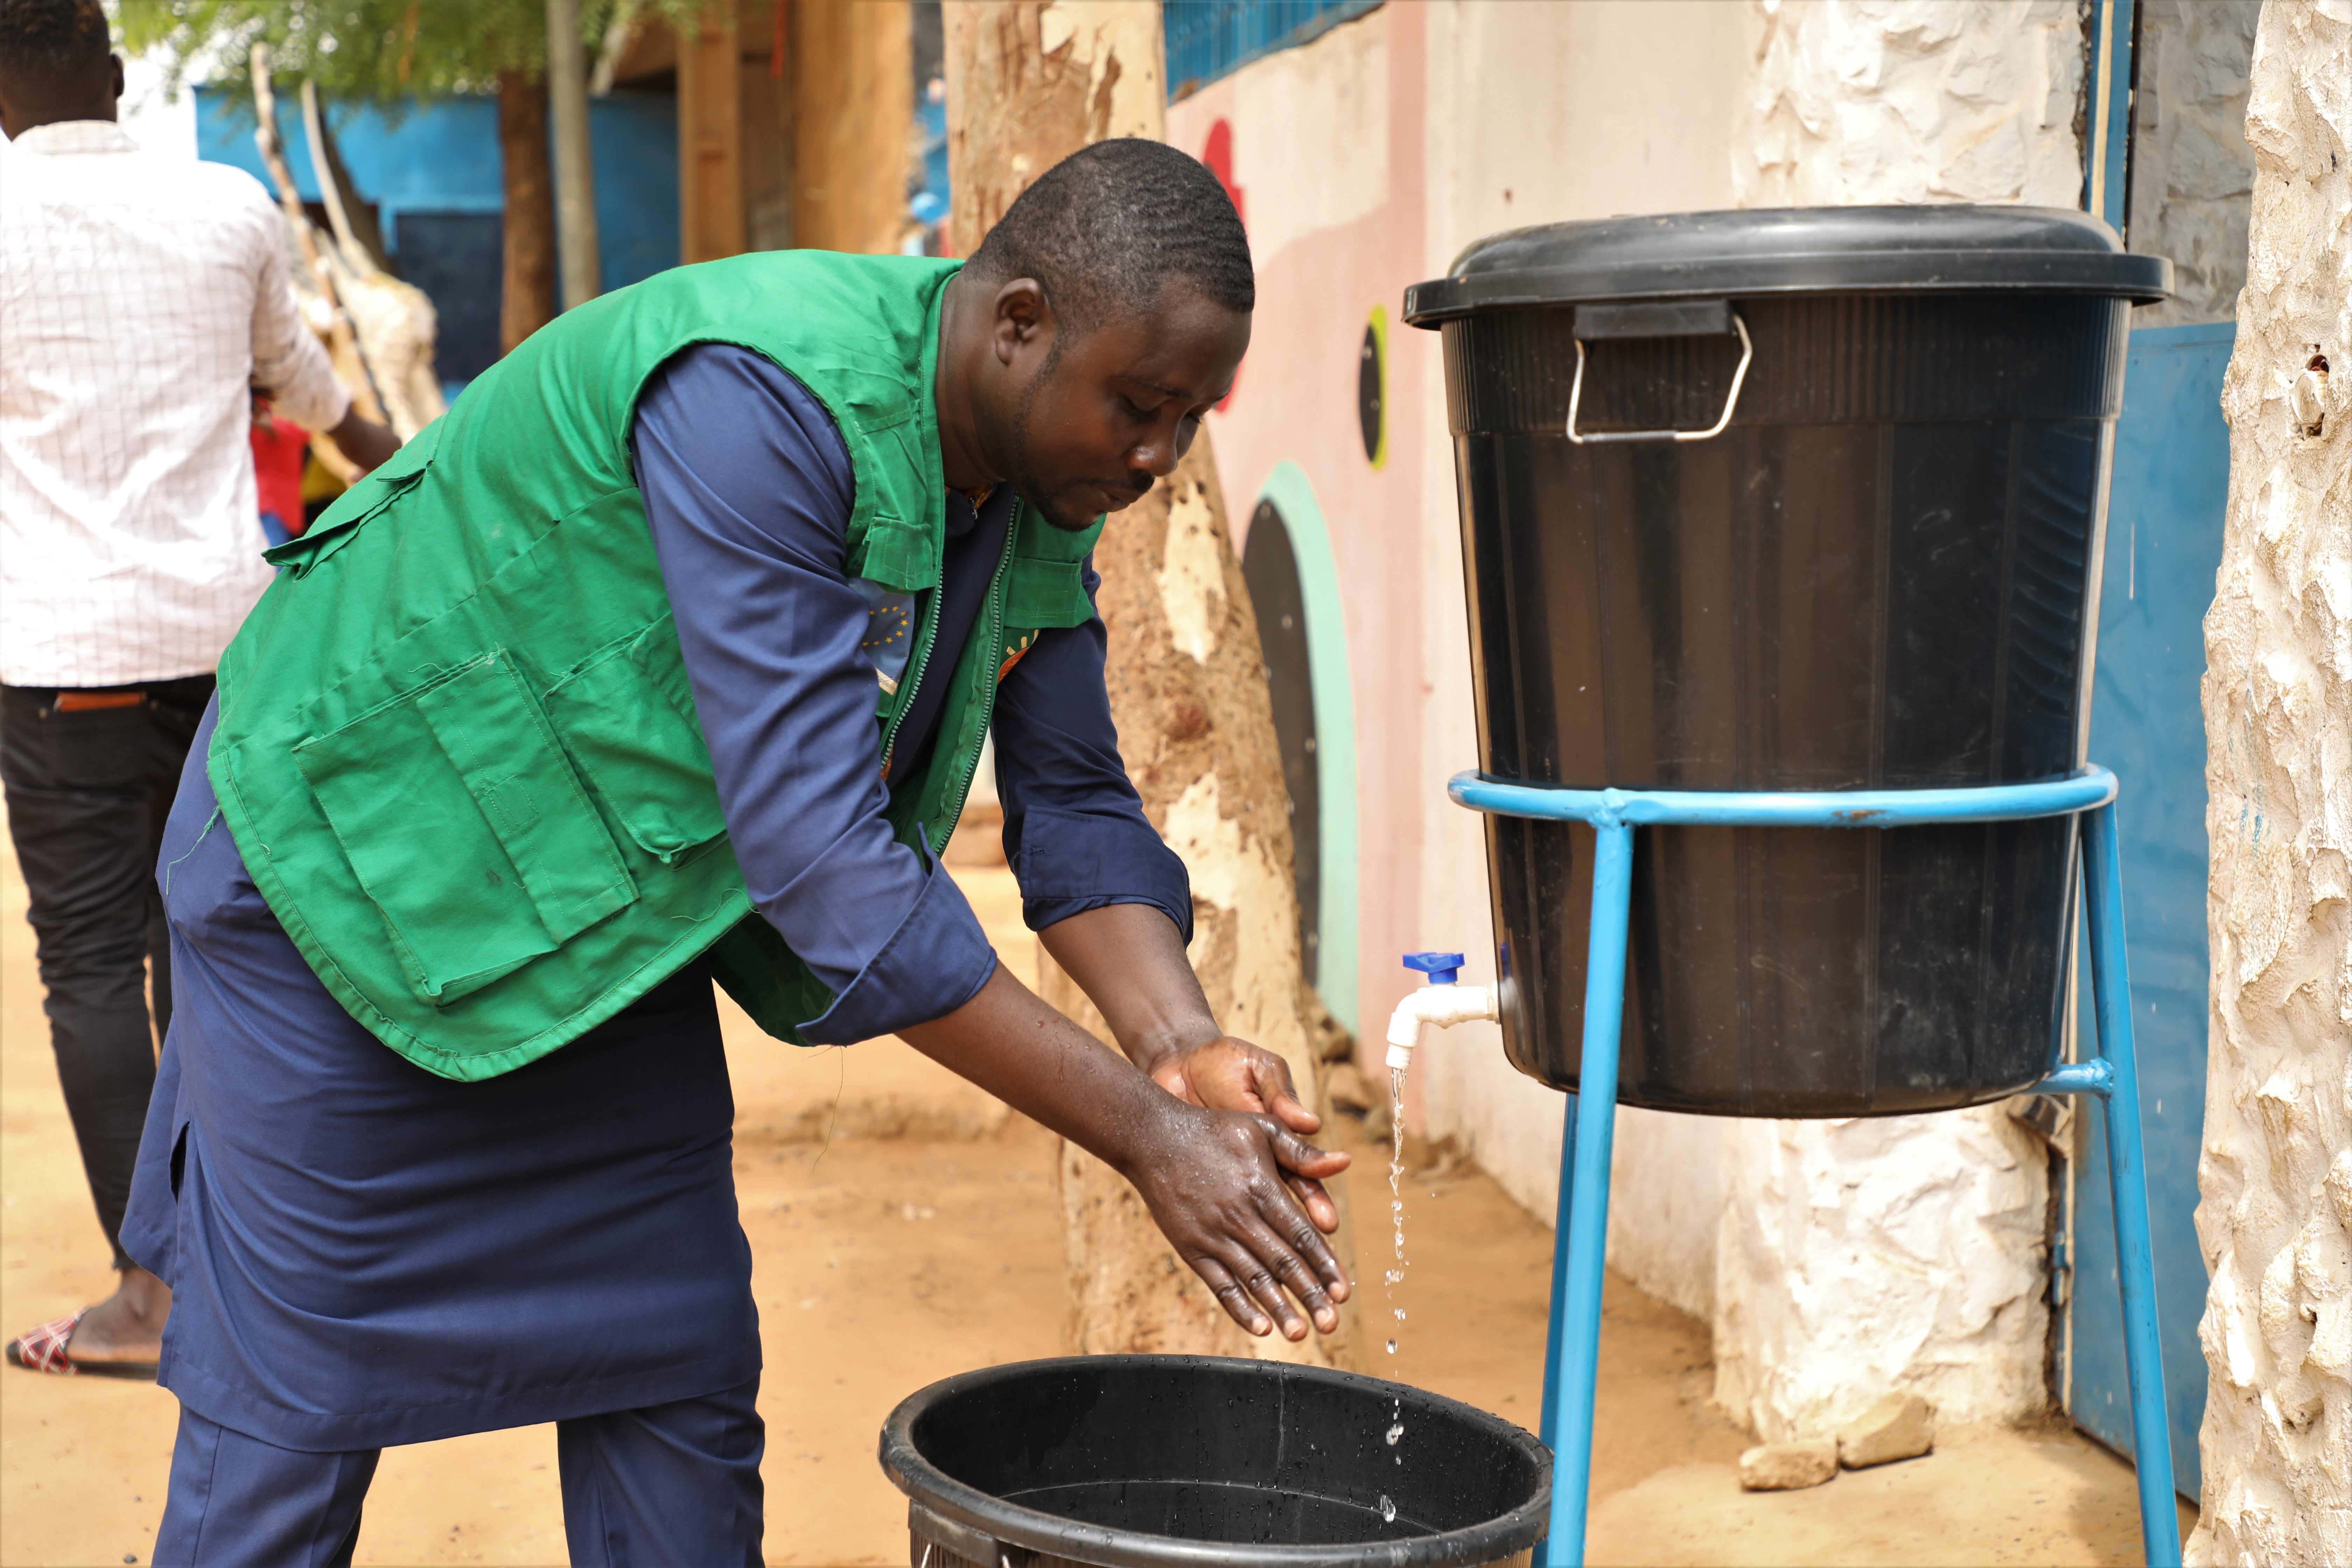 IOM and returnees demonstrate hygiene measures and handwashing to migrants in transit and displaced persons in Niger.